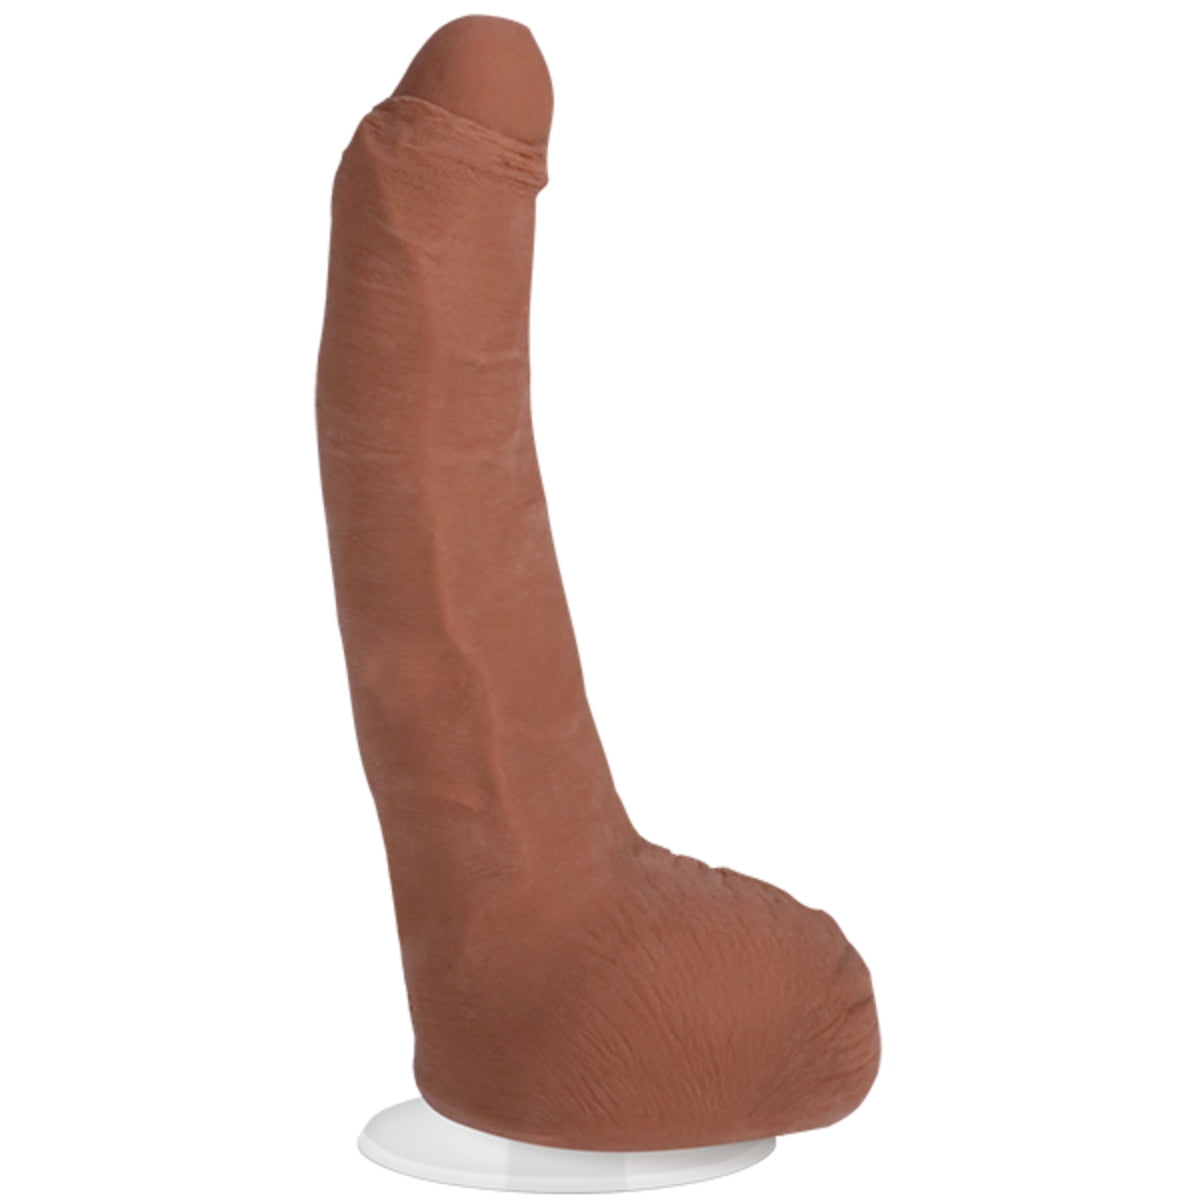 Signature Cocks Leo Vice Cock UltraSkyn 6inch Dildo with Removable Vac-U-Lock Suction Cup (8183721263343)